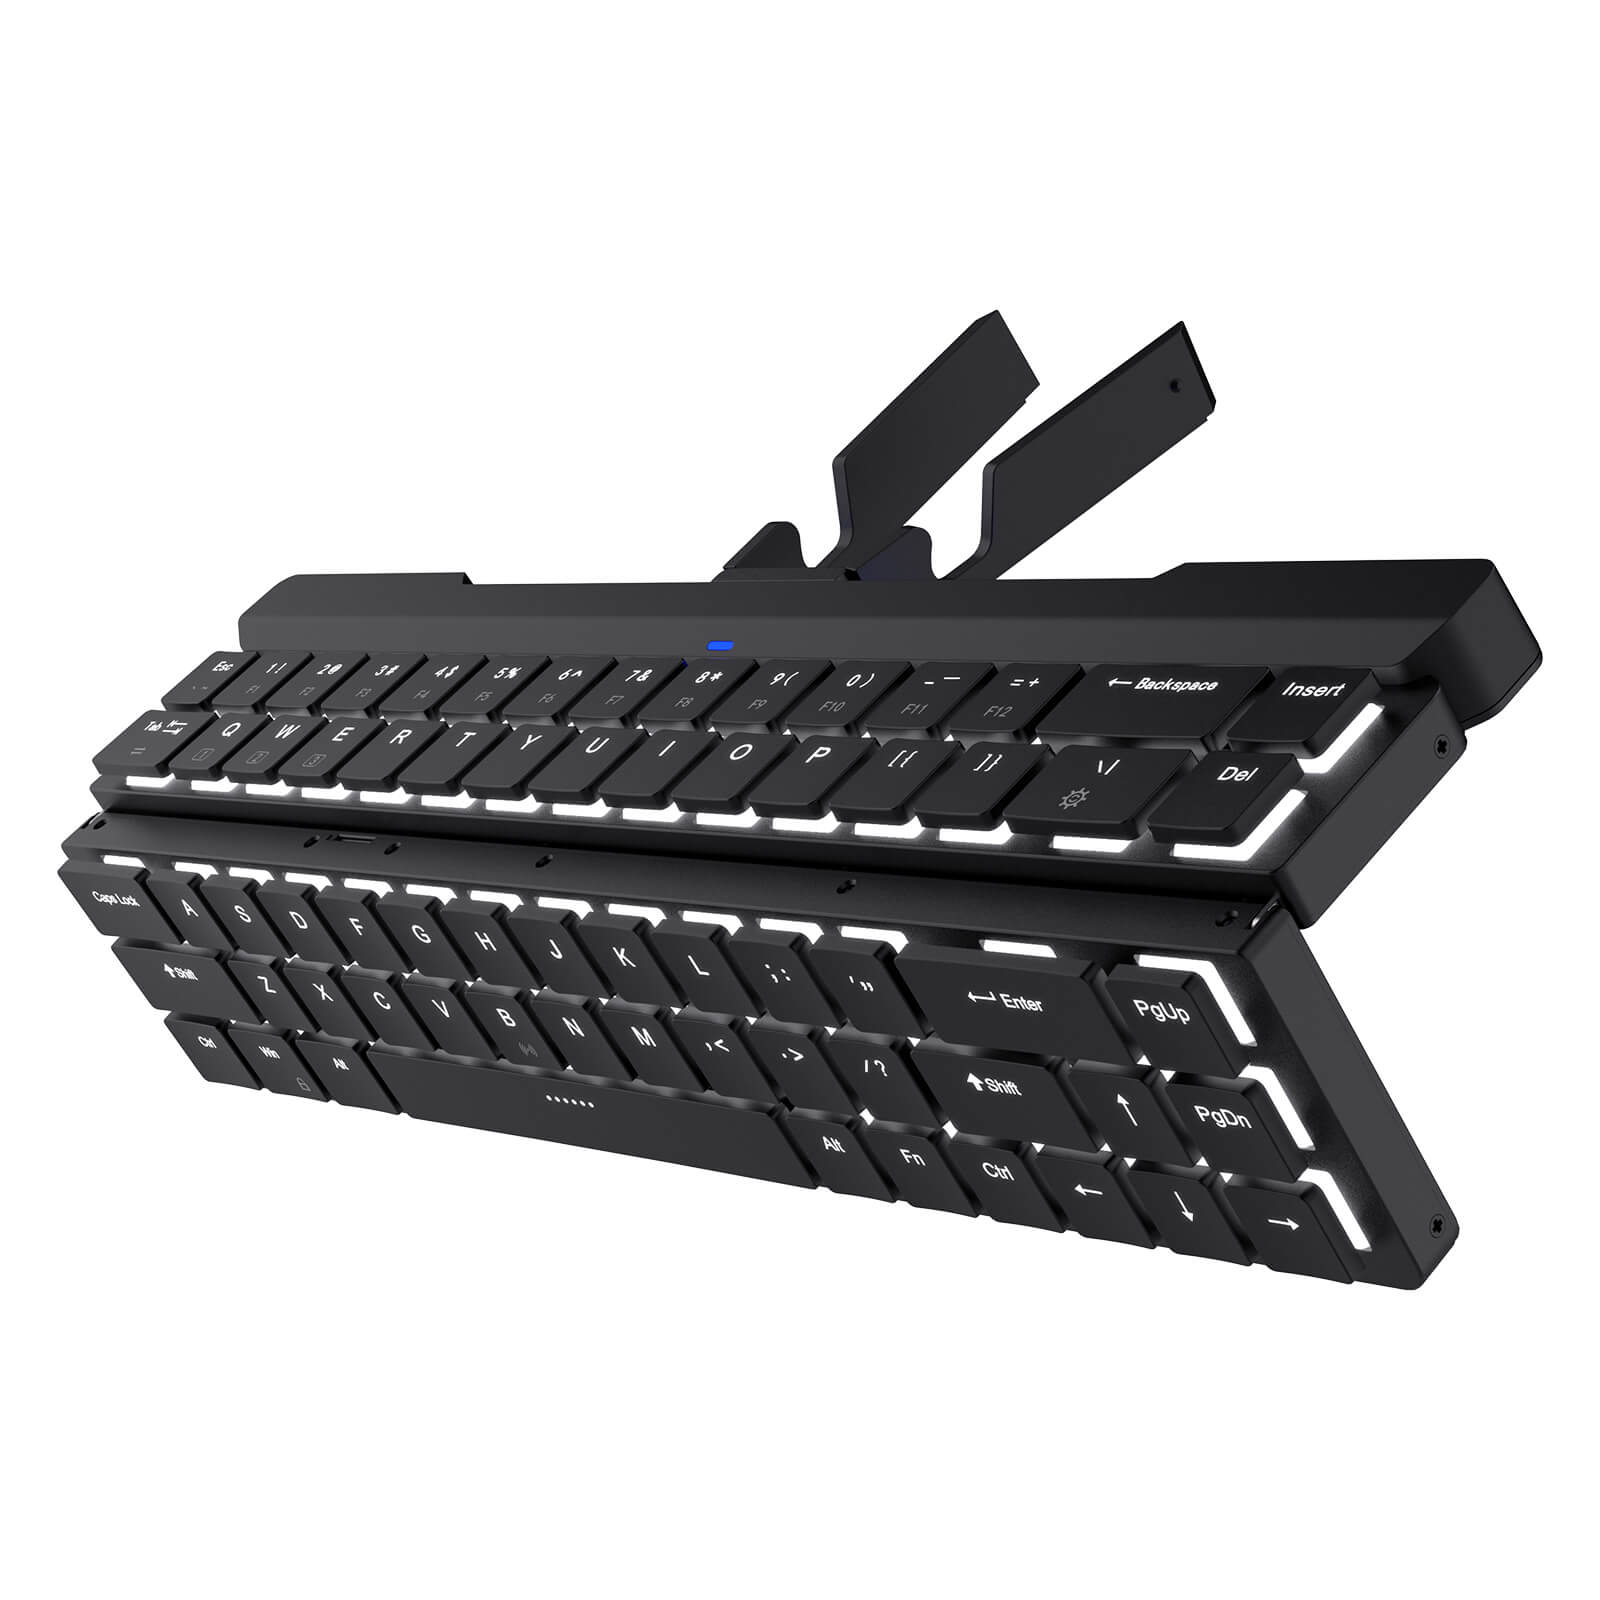 RK ROYAL KLUDGE RK925 68 Keys 60% Wireless Bluetooth Foldable Mechanical Keyboard with Built-in Stand Holder, Low Profile White Switches